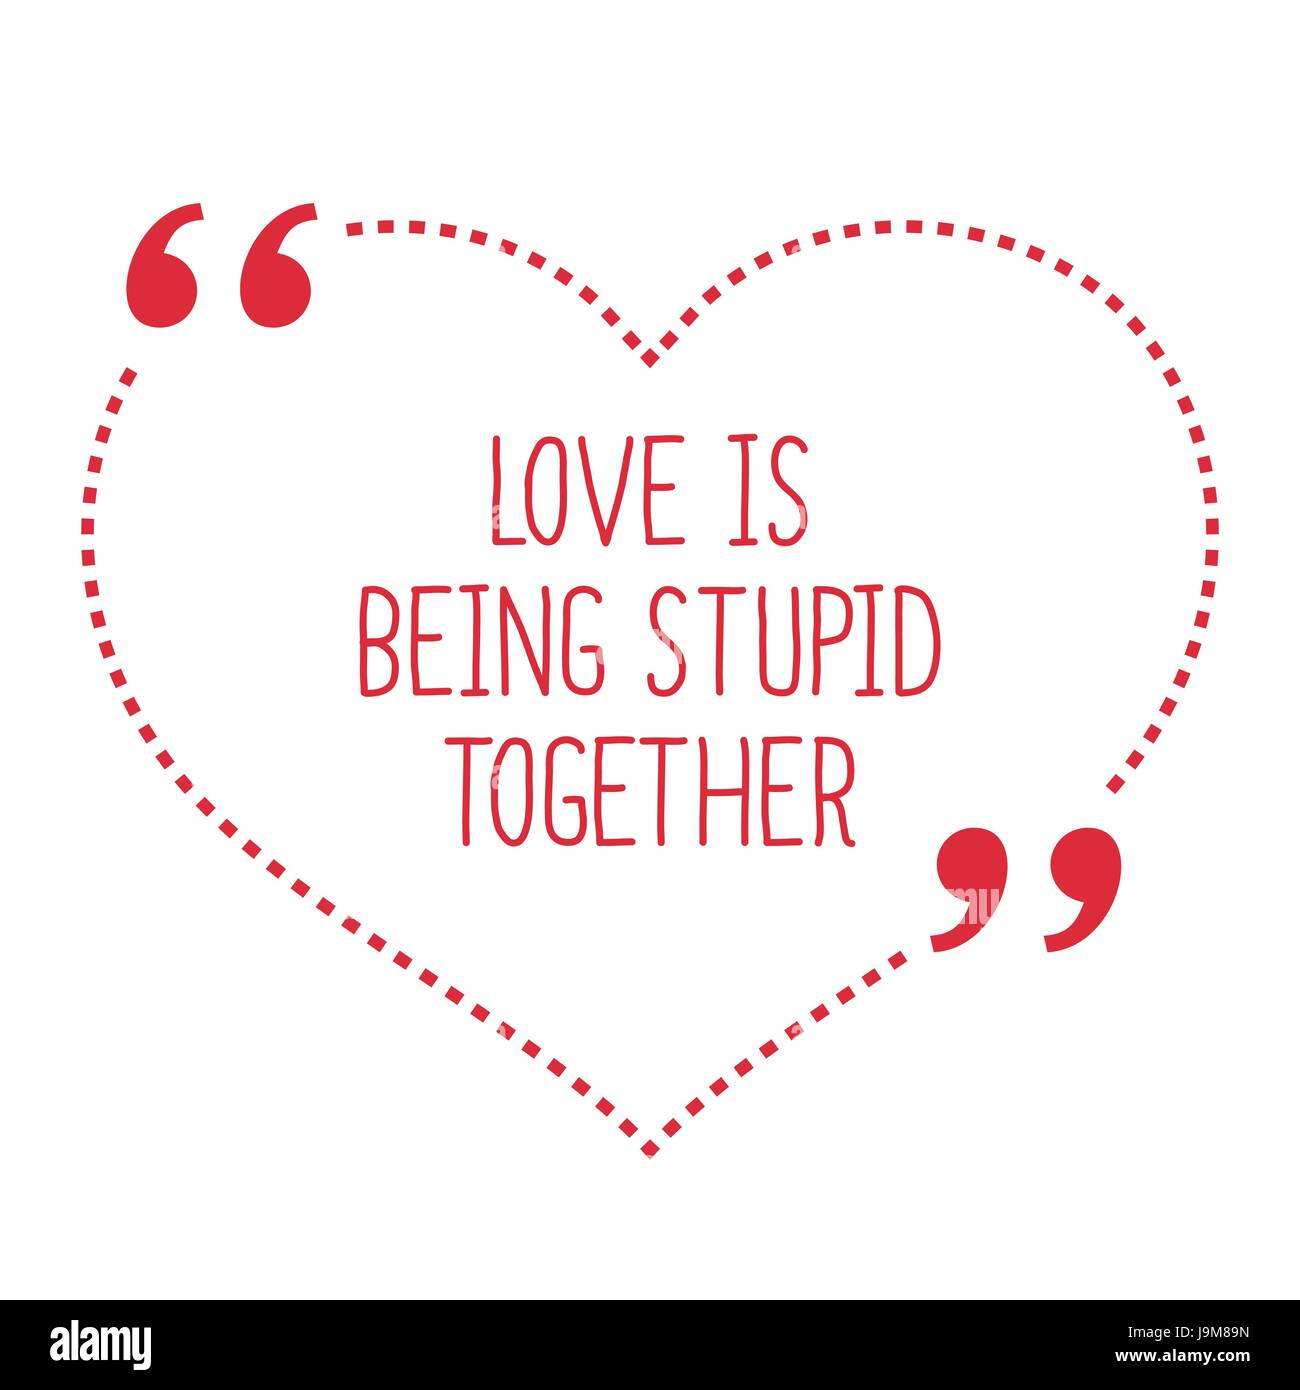 Funny love quote. Love is being stupid together. Simple trendy design. Stock Vector